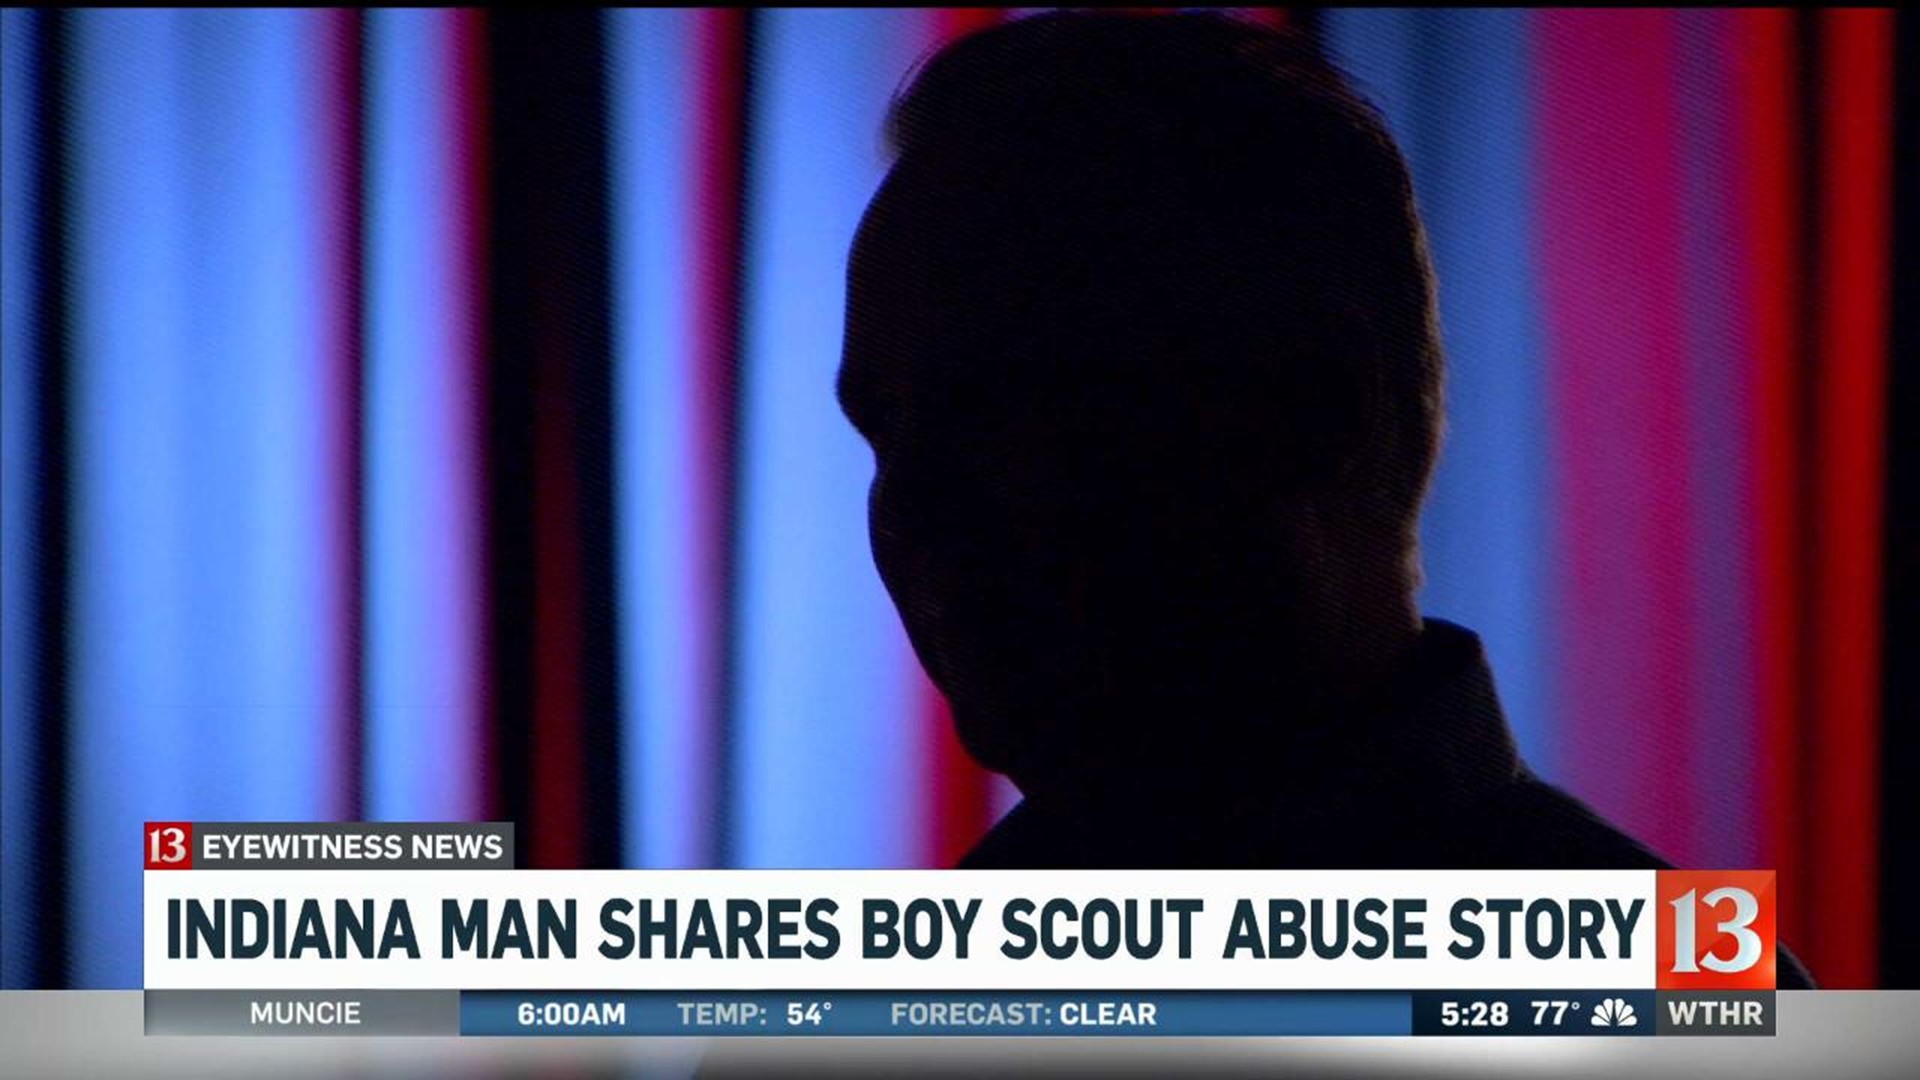 Man shares Boy Scout abuse story